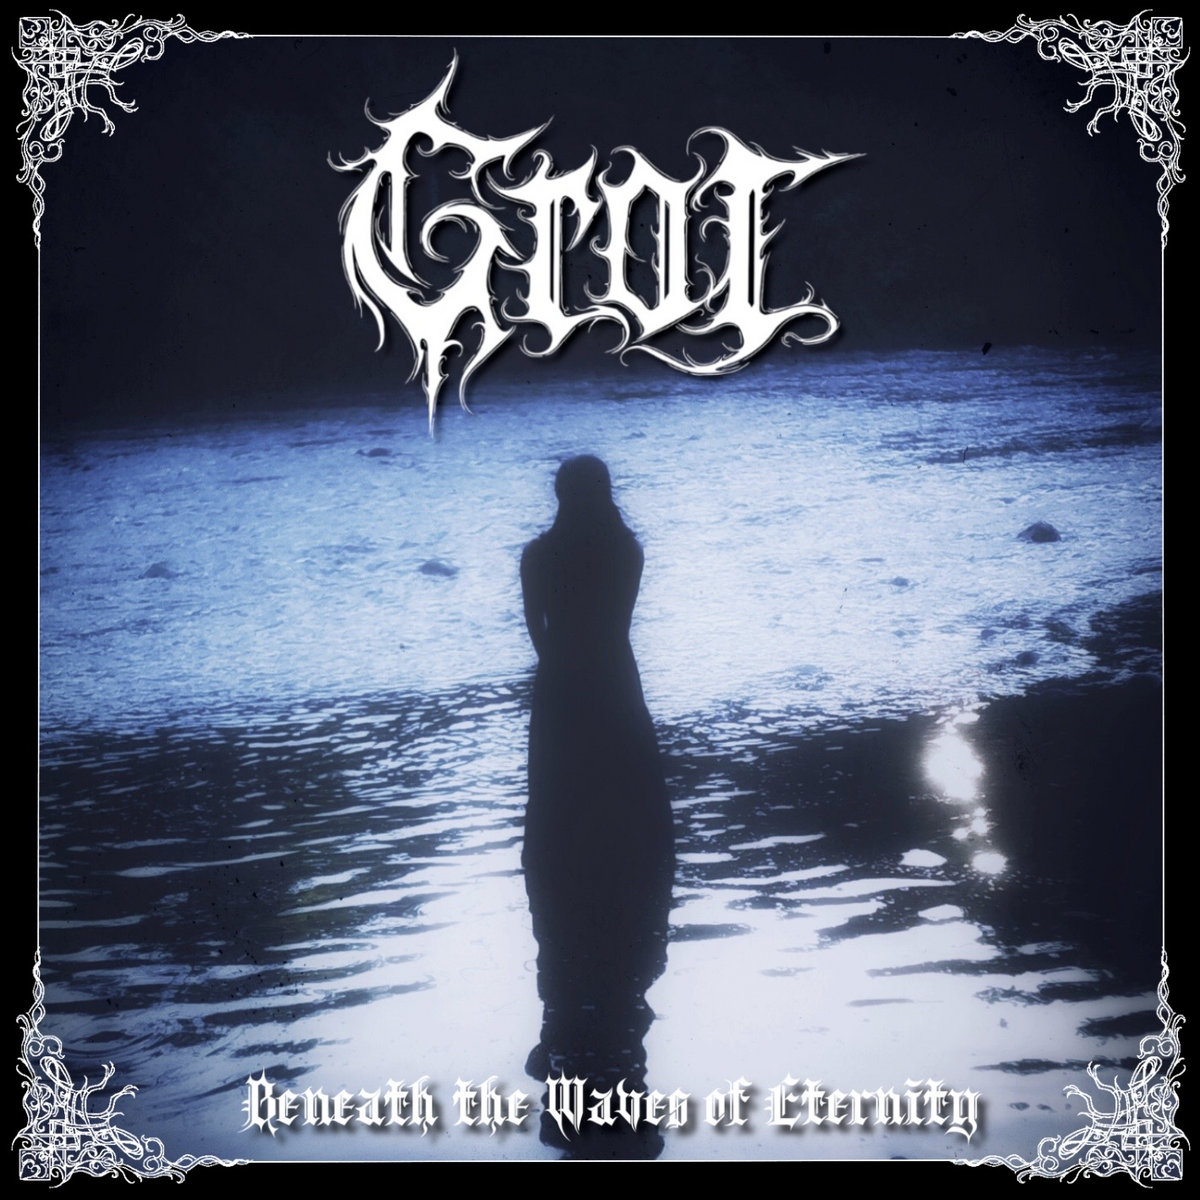 grot – beneath the waves of eternity